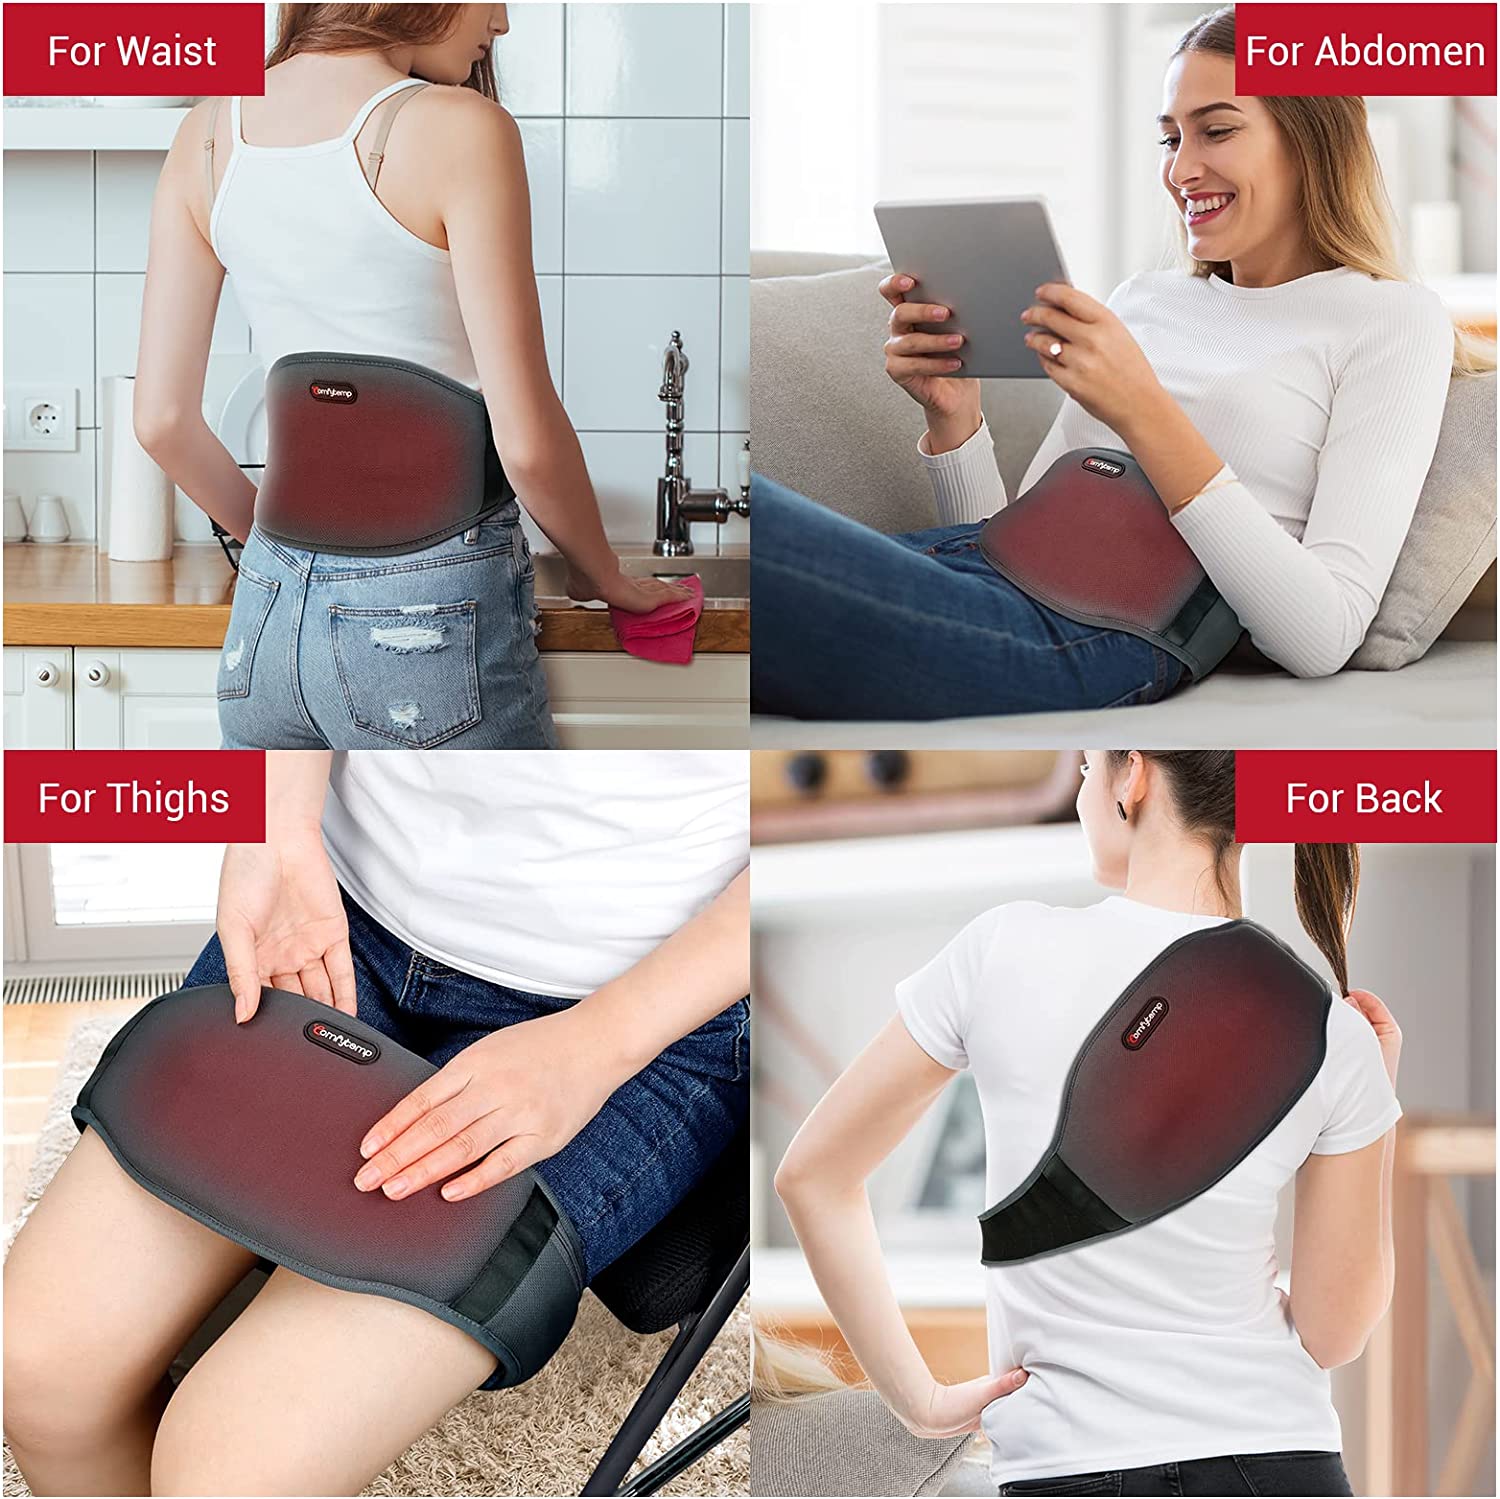  Cordless Heating Pad Heated Back Brace for Lower Back Massager  Pain Relief Lumbar Women Heat Cold Therapy 5V 10000mAH Power Bank Cordless  Electric Heating Pad : Health & Household